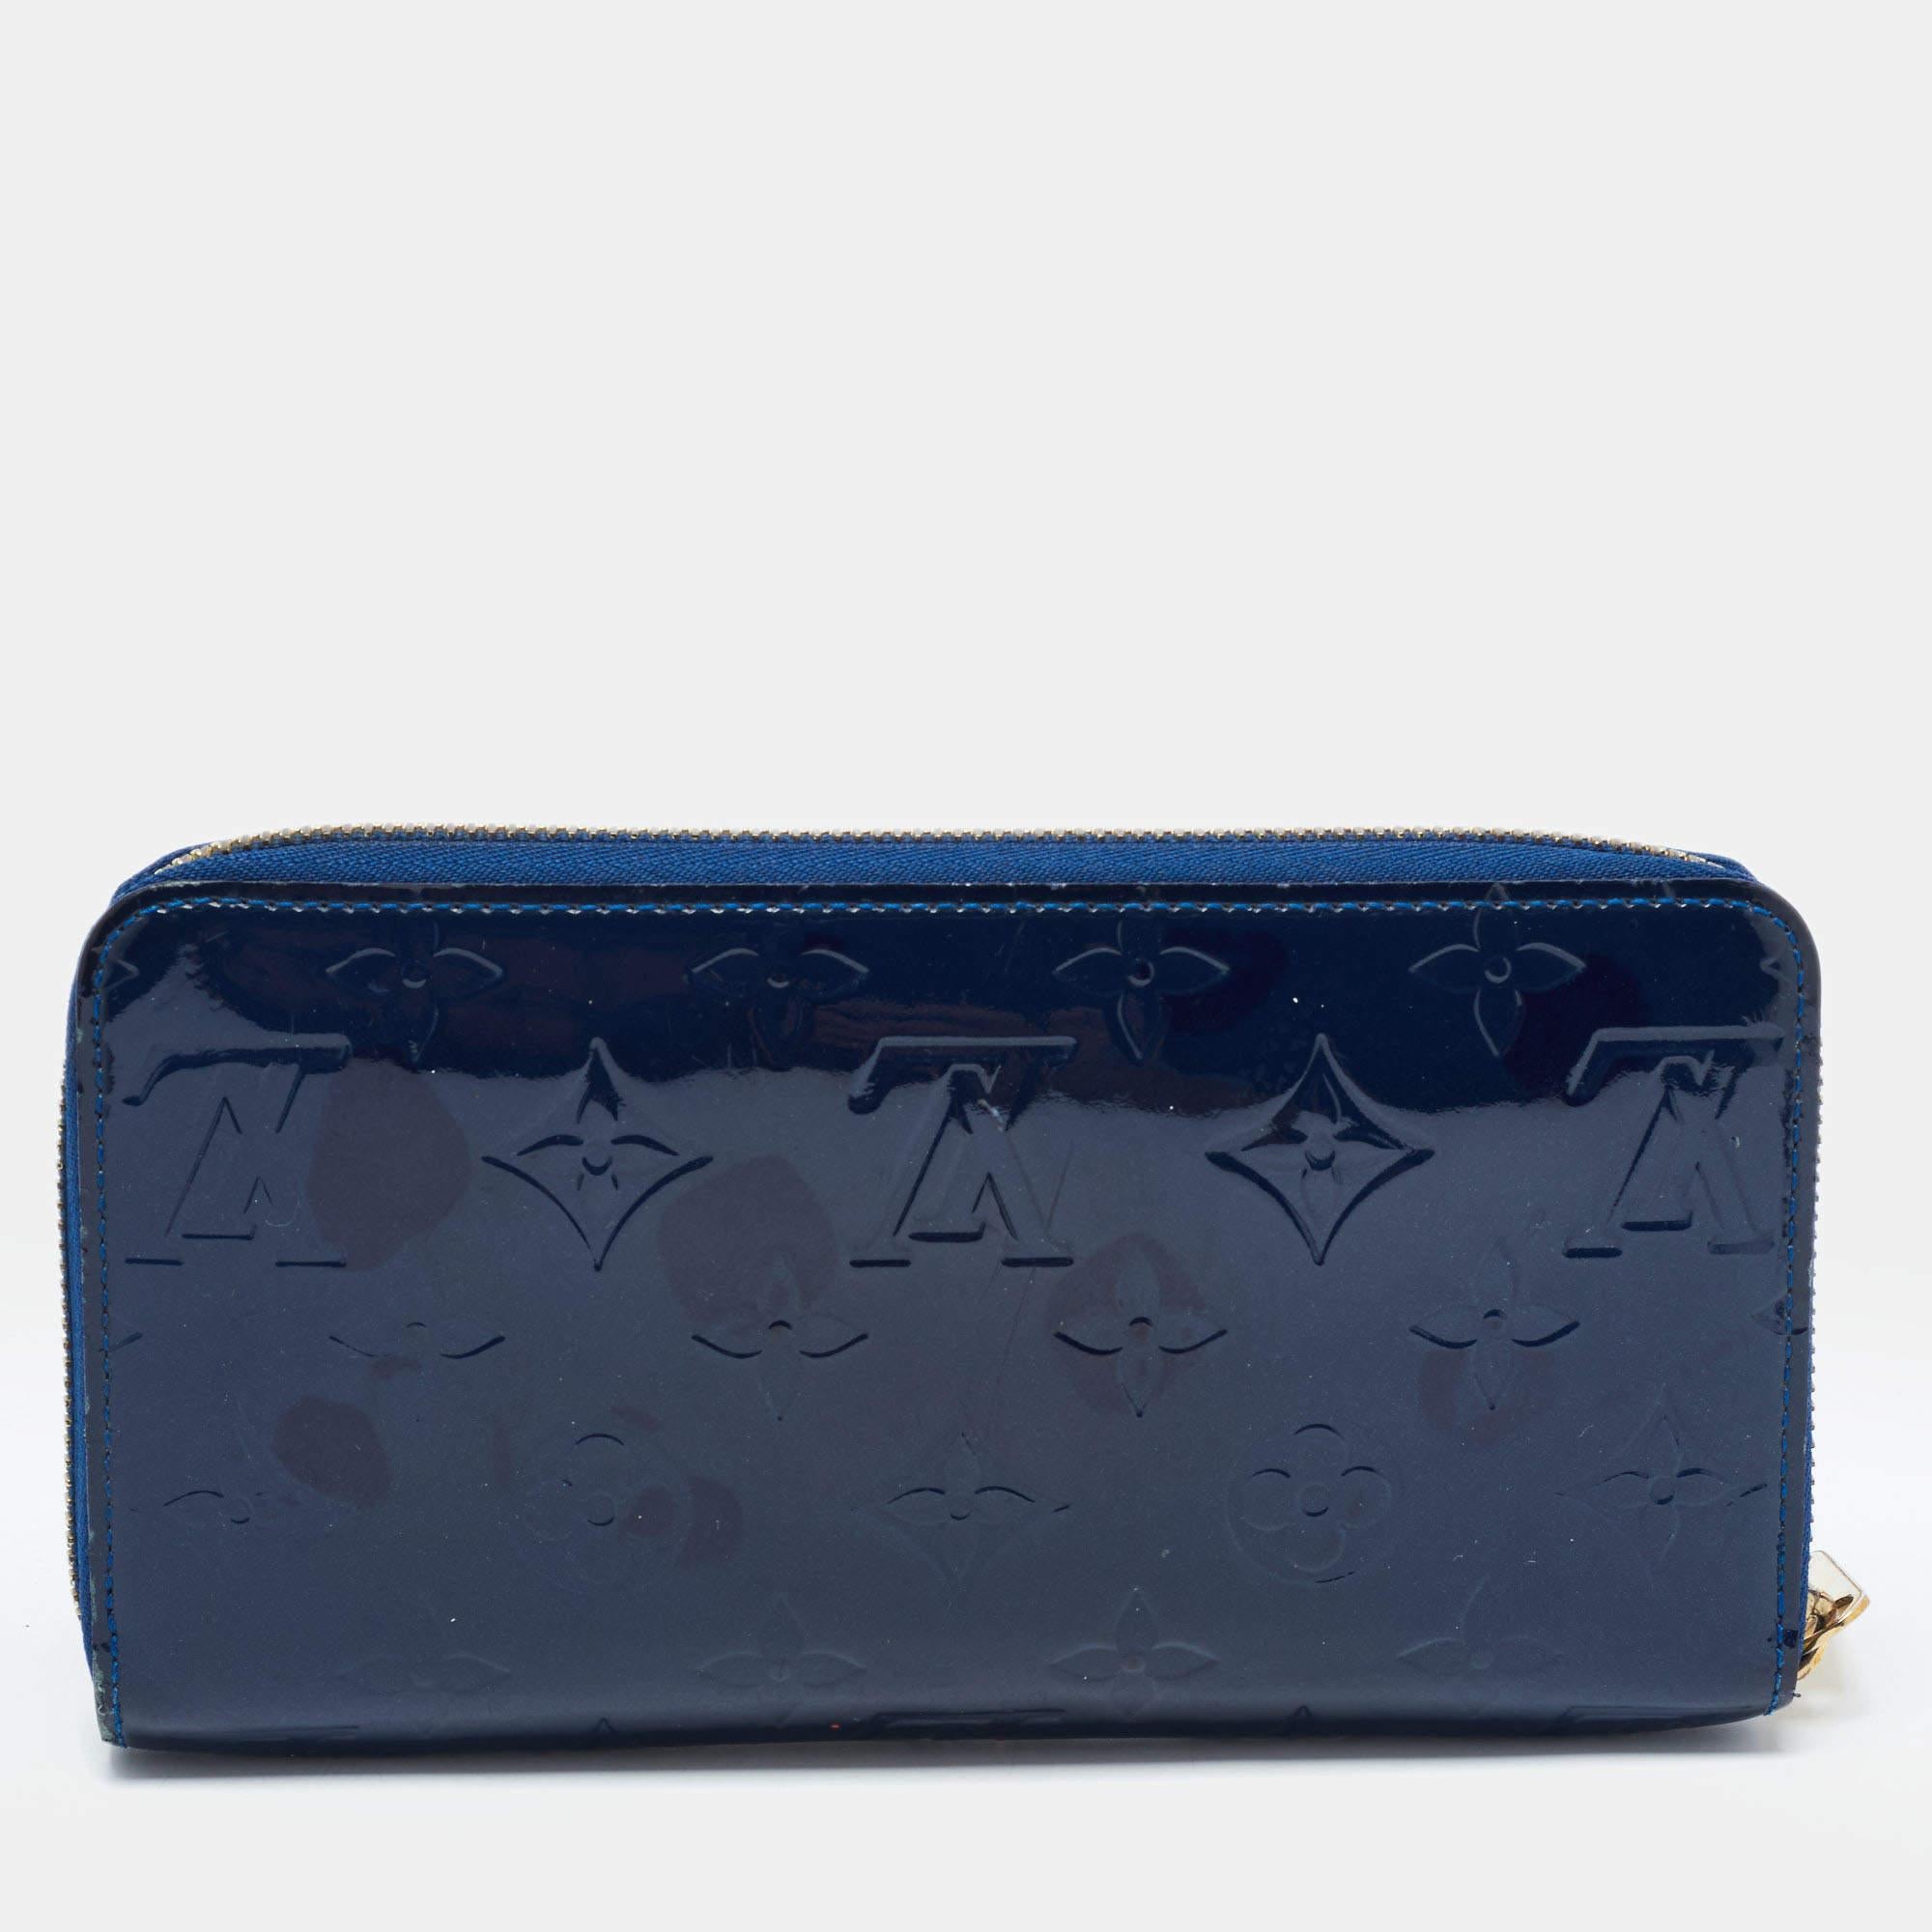 This Louis Vuitton Zippy wallet is conveniently designed for everyday use. Crafted from Monogram Vernis, the wallet has a wide zip closure that opens to reveal multiple slots, lined compartments, and a zip pocket for you to arrange your daily